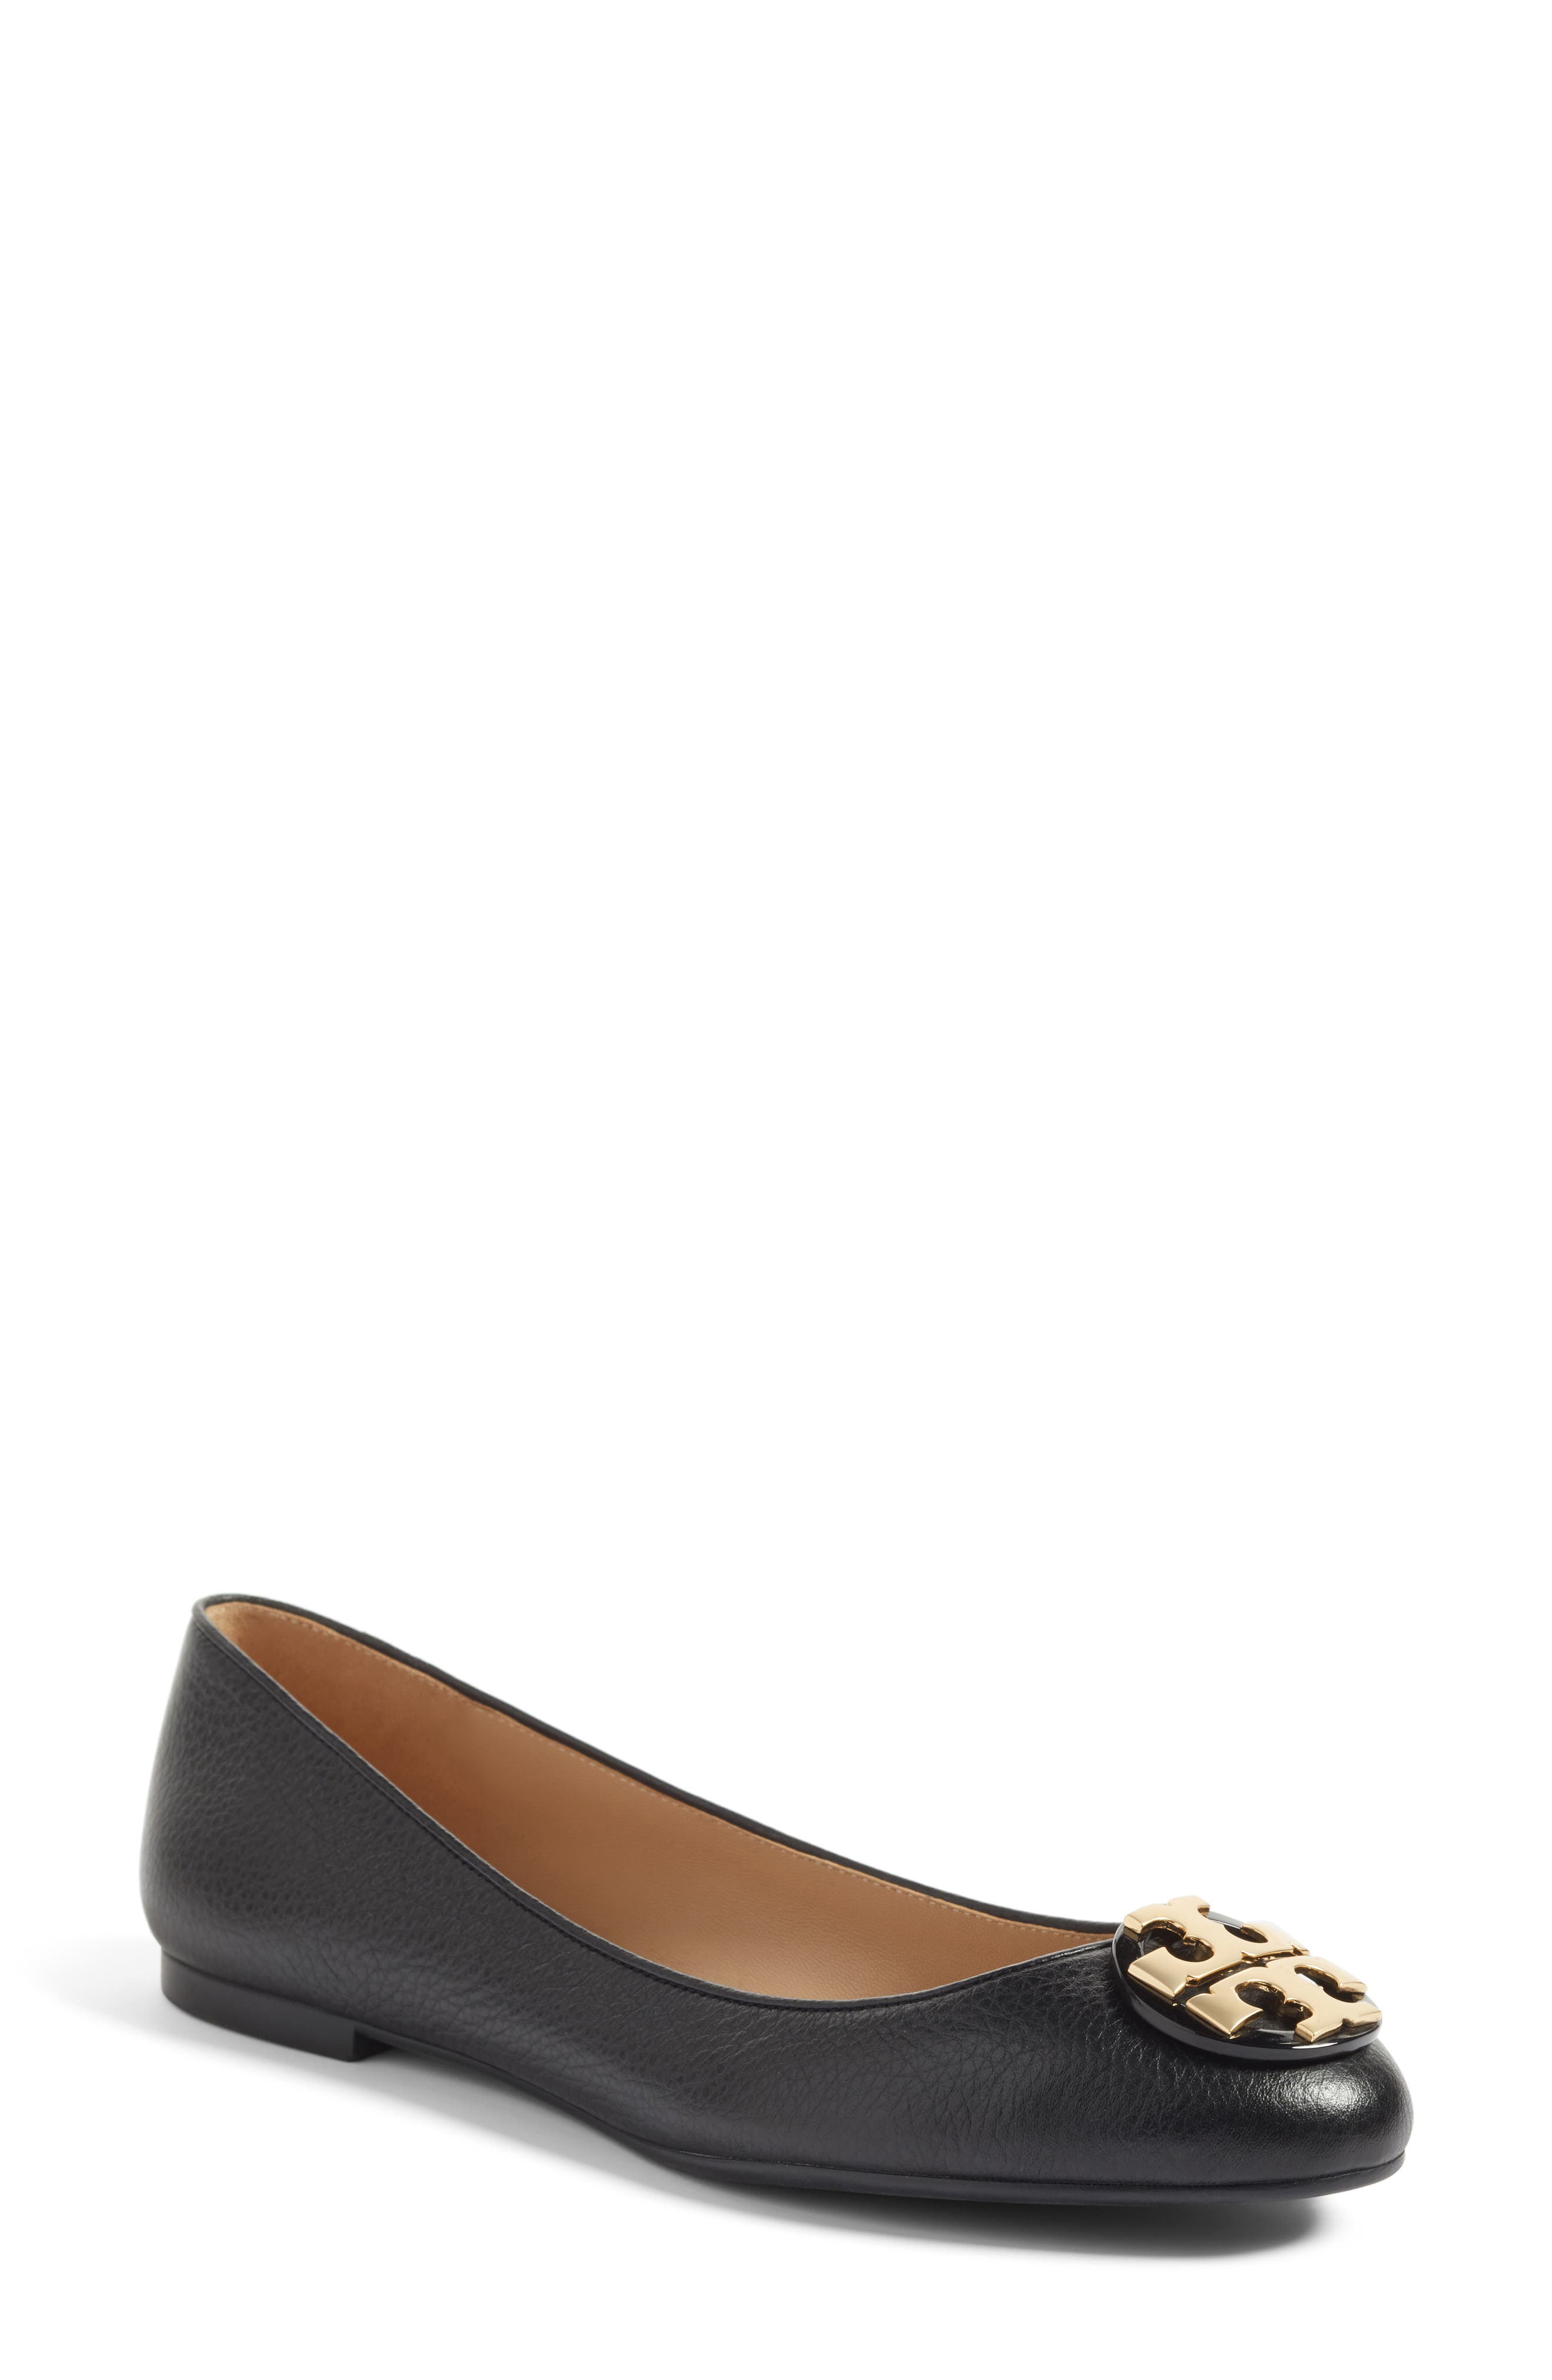 tory burch shoes nordstrom